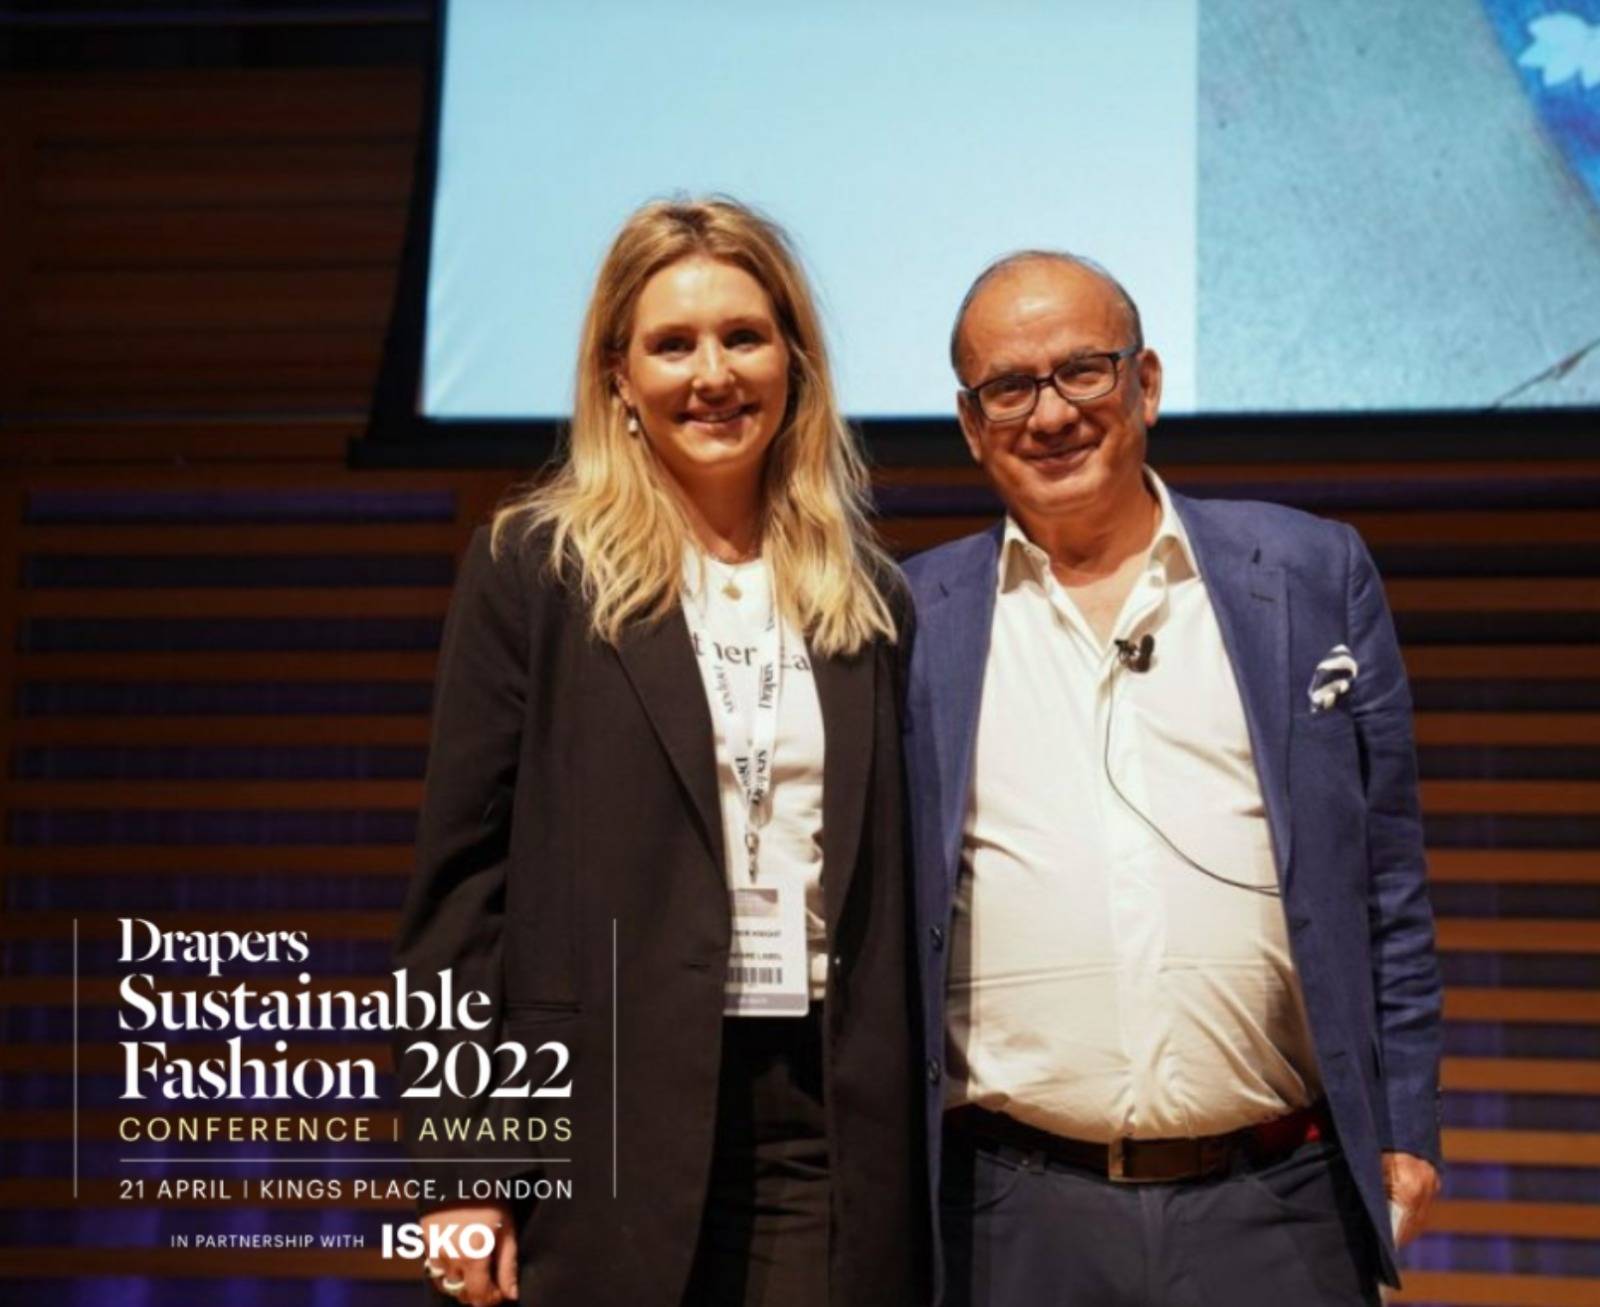 Esther Knight & Touker Suleyman at the Drapers Sustainable Fashion Conference